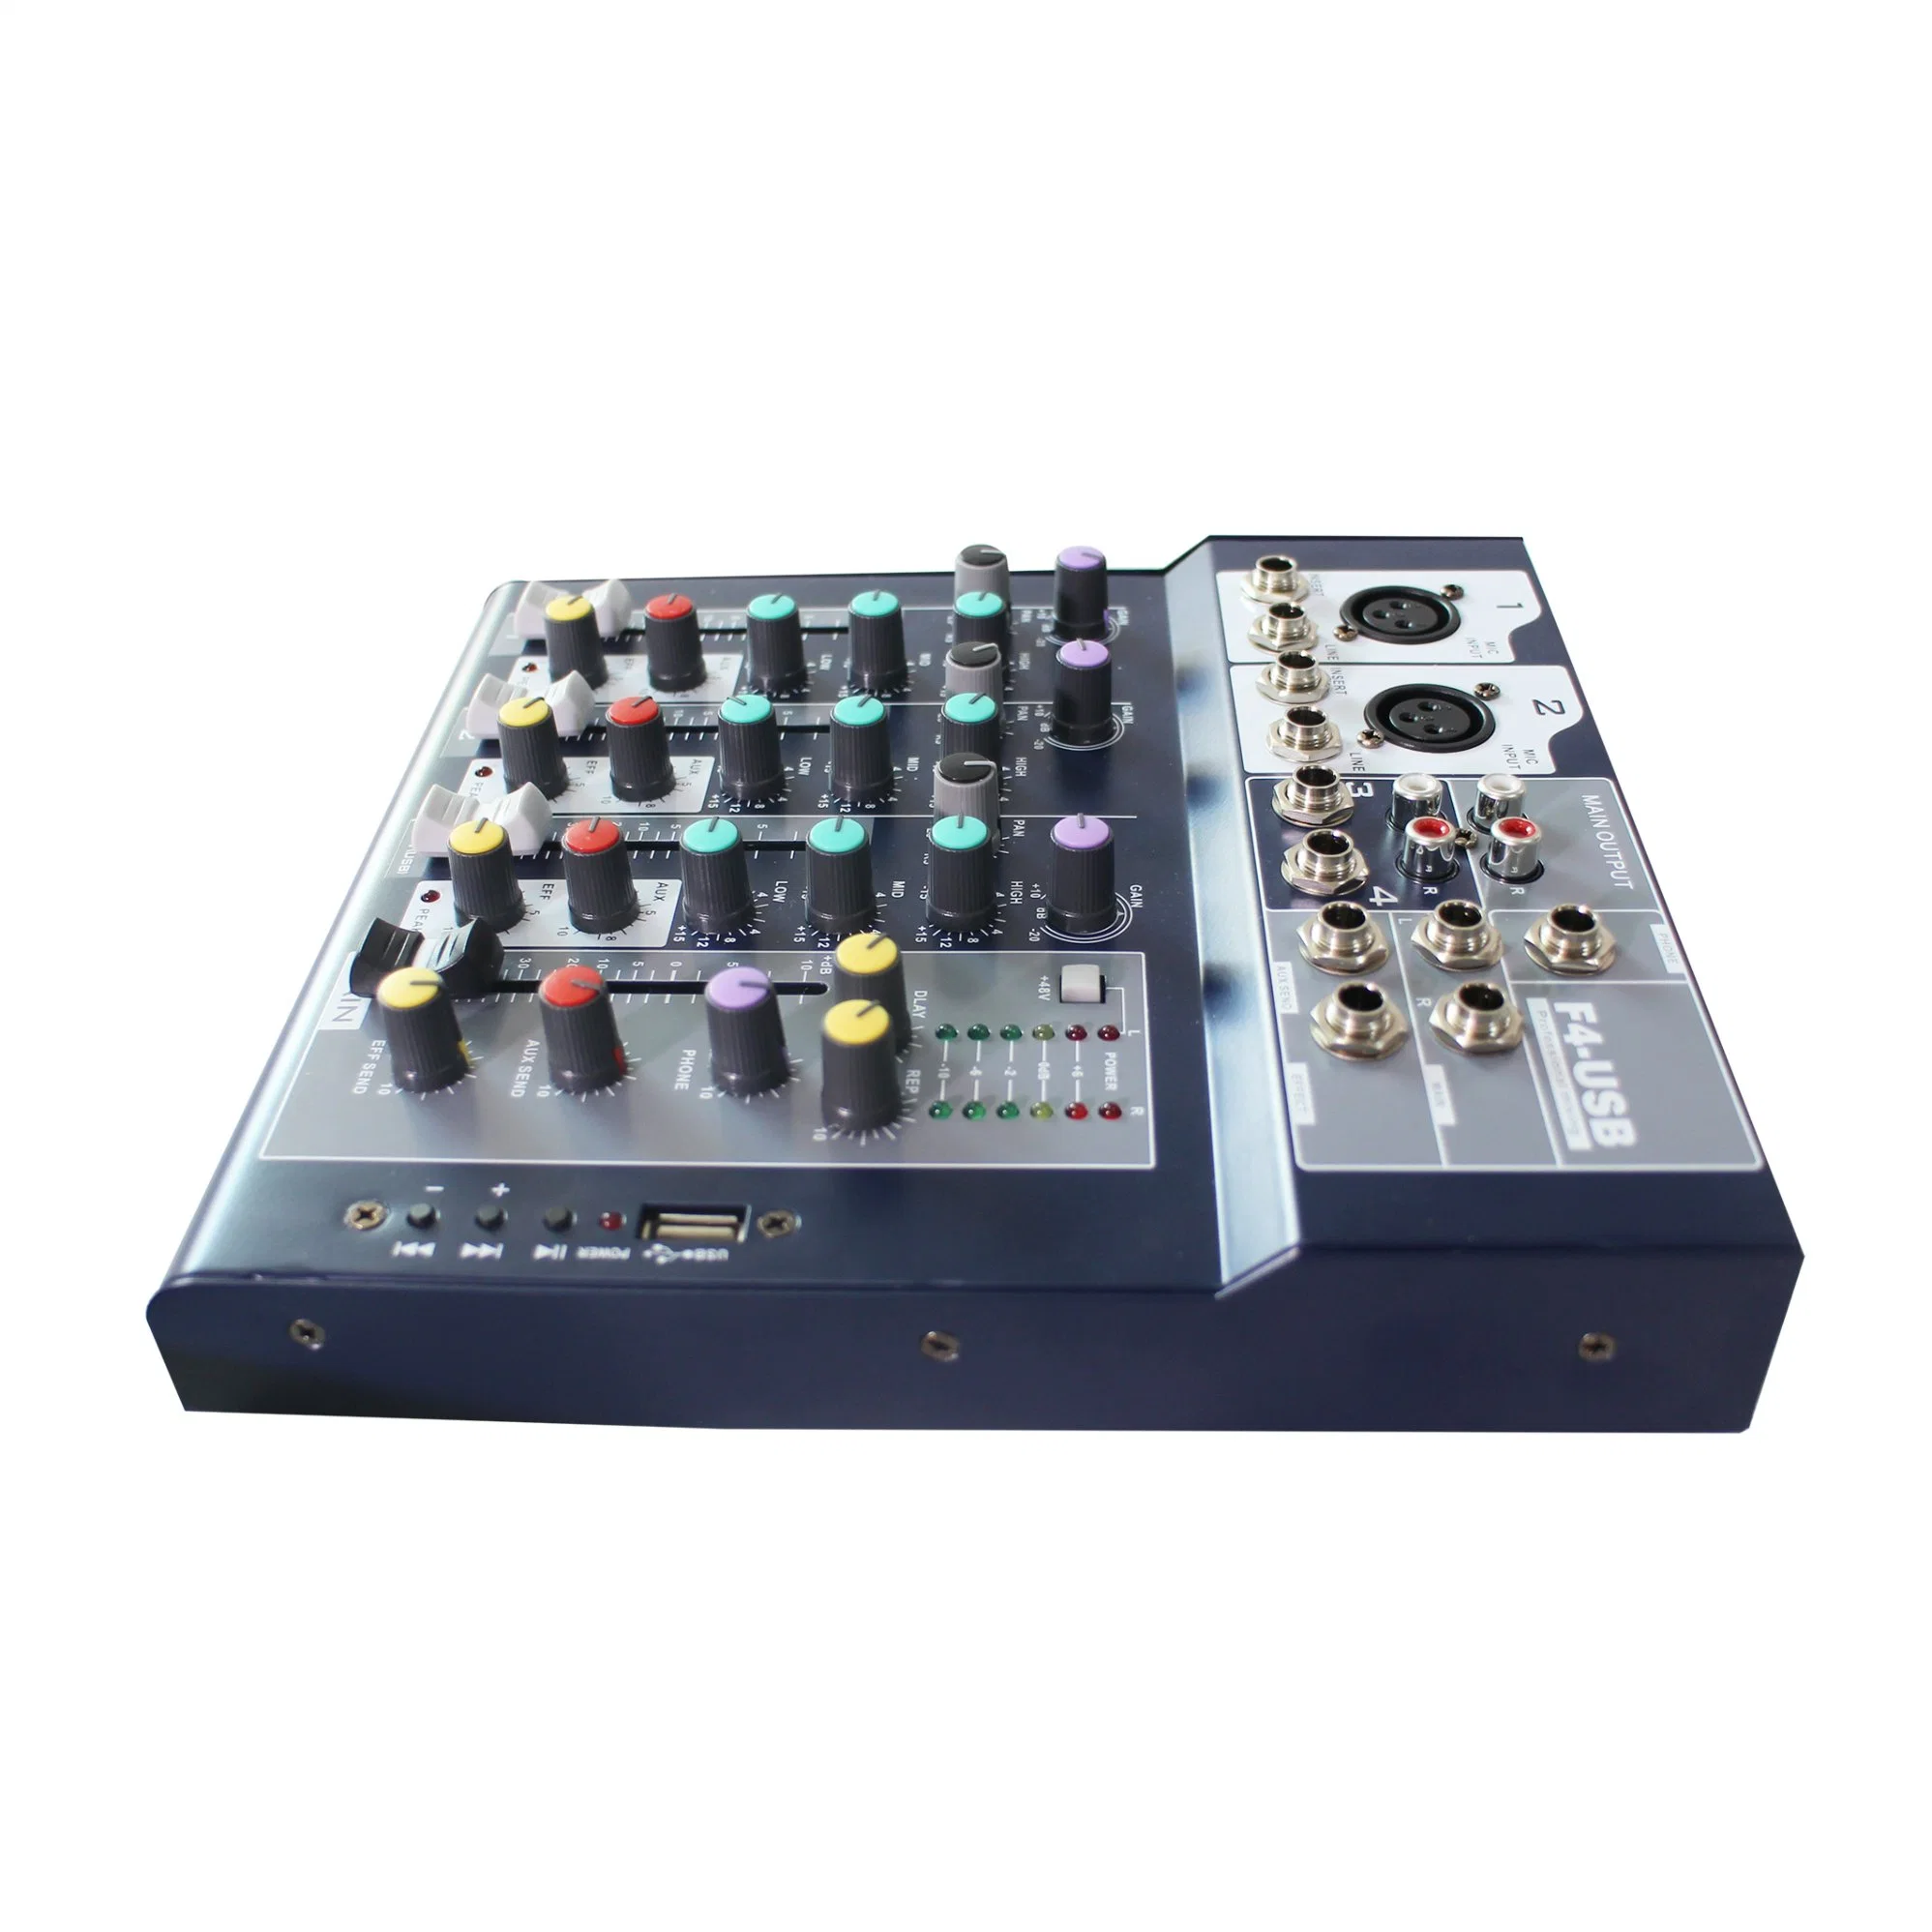 High Quality 4 CH Compact Audio Mixer with 3-Band Channel Equalizer Professional Audio Mixer